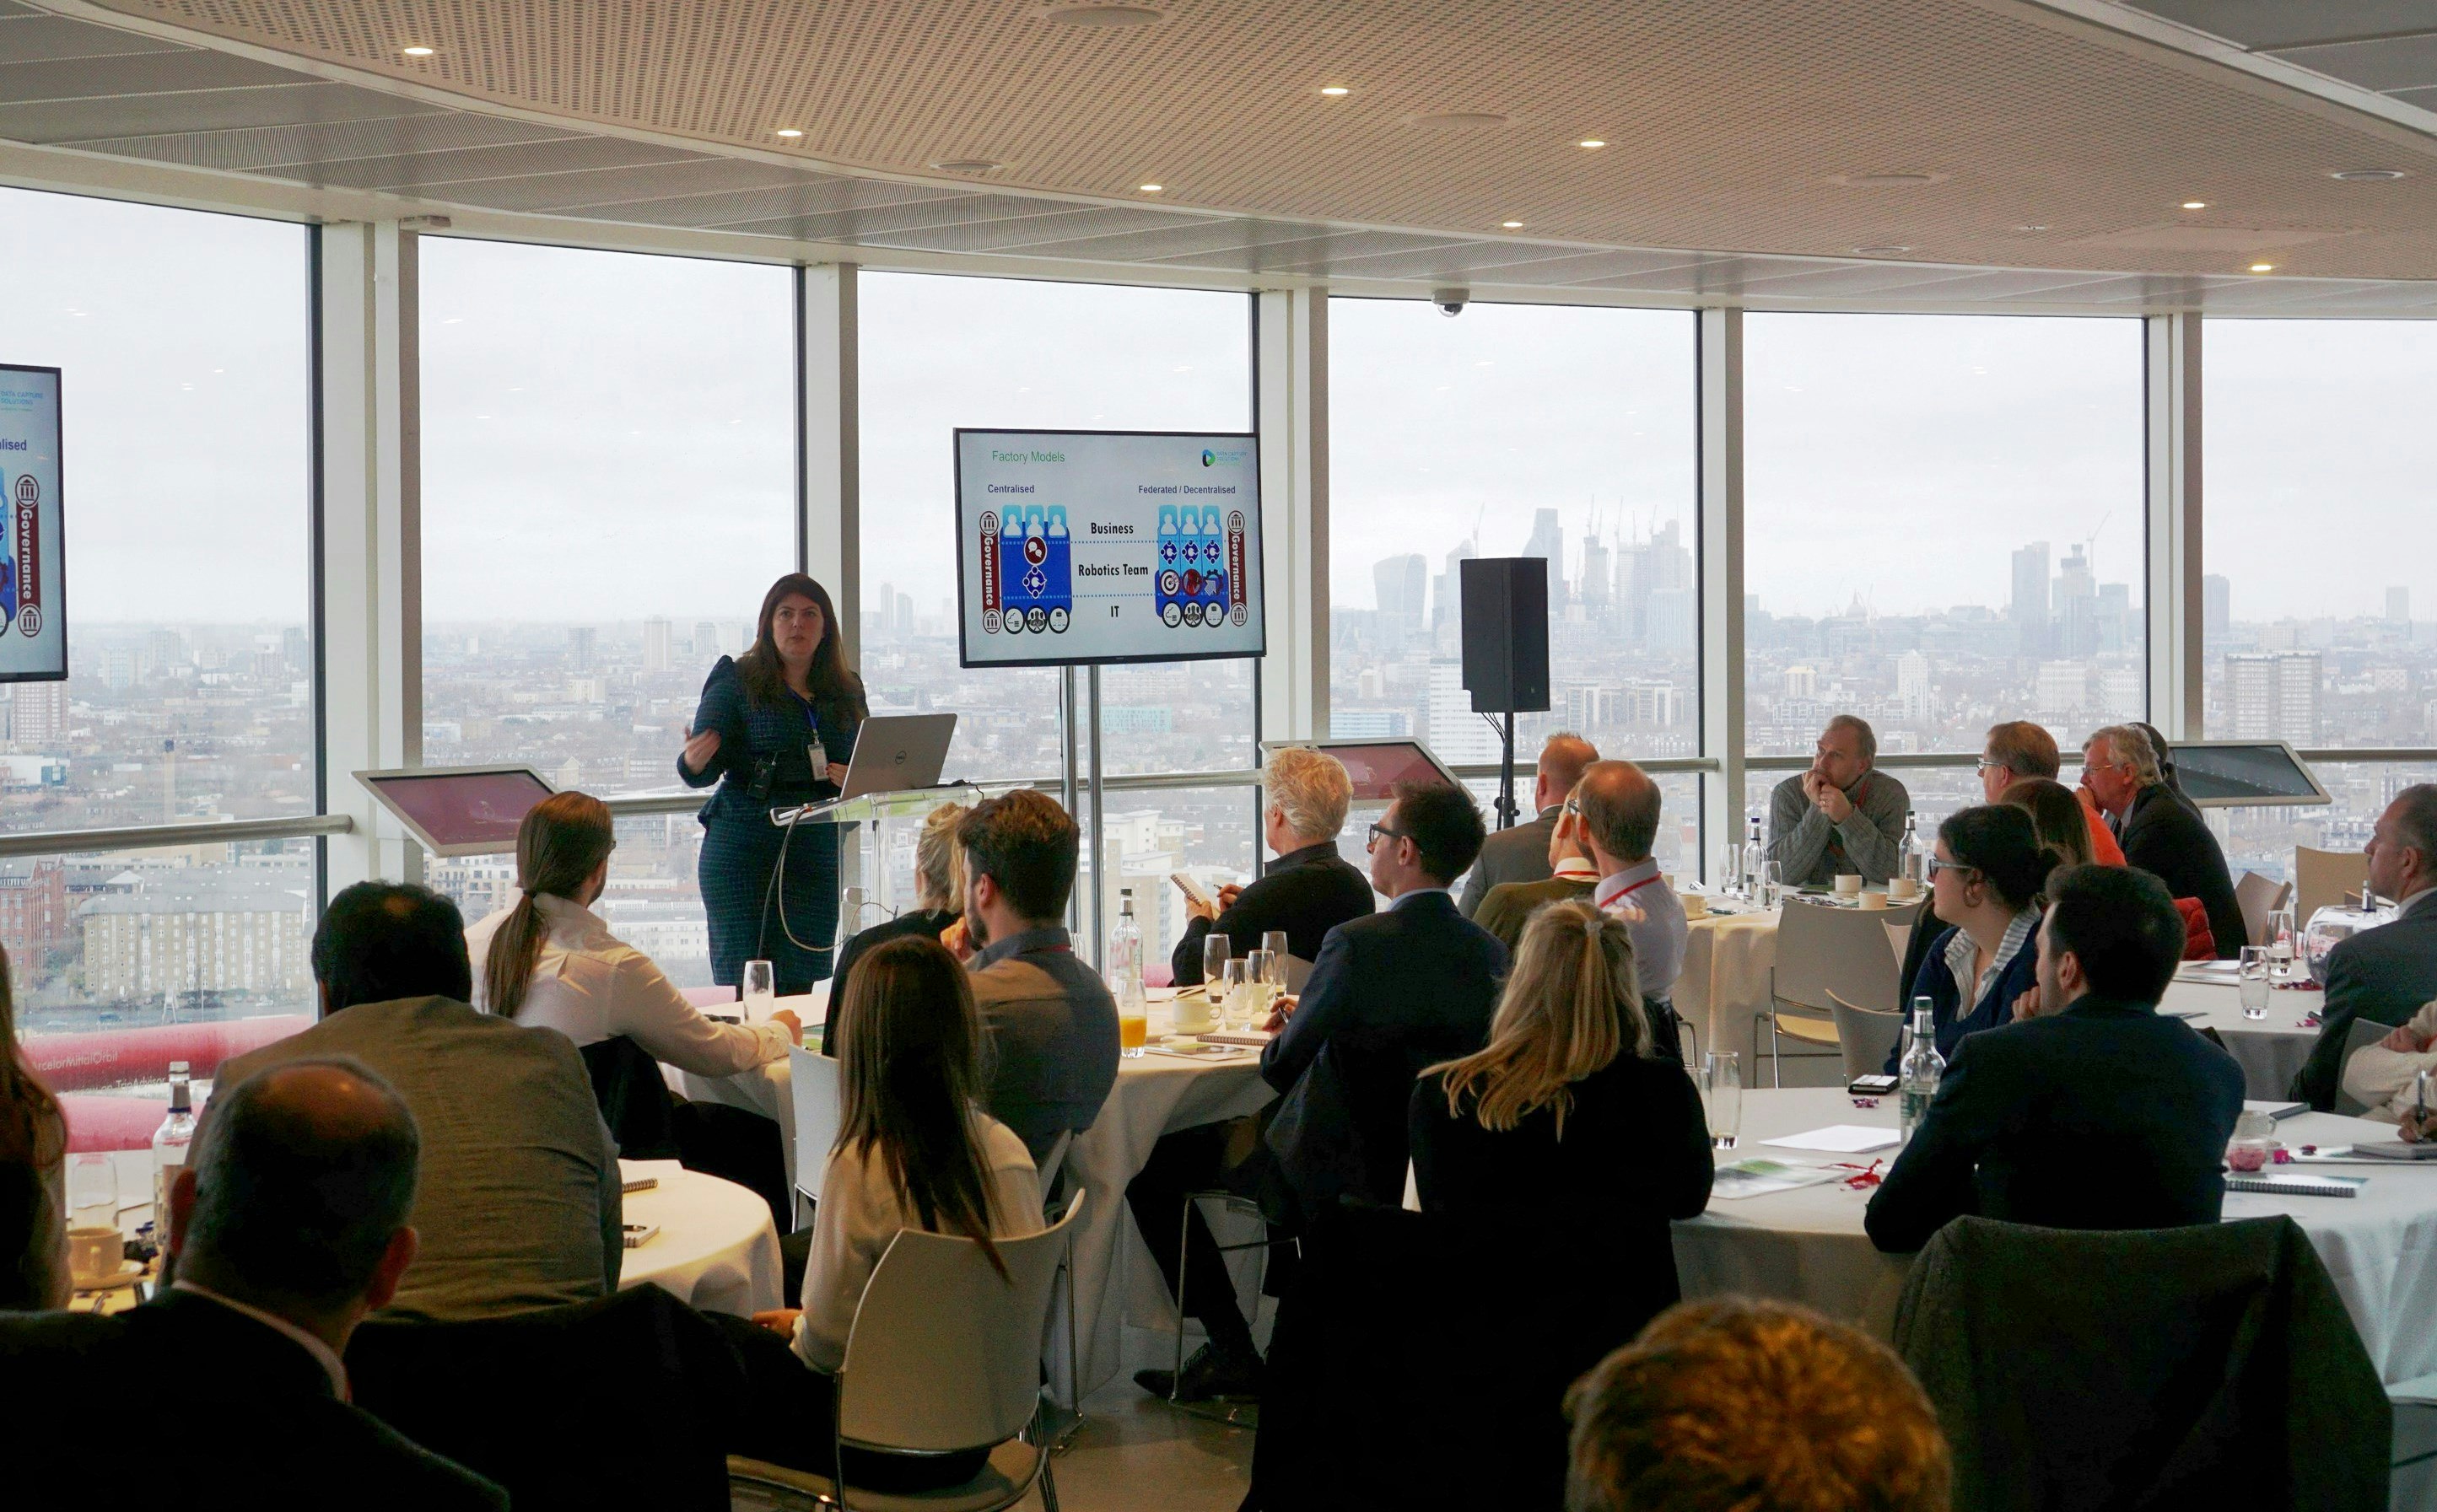 Team Building Events Venues in London - ArcelorMittal Orbit  - Business in ArcelorMittal Orbit - Banner